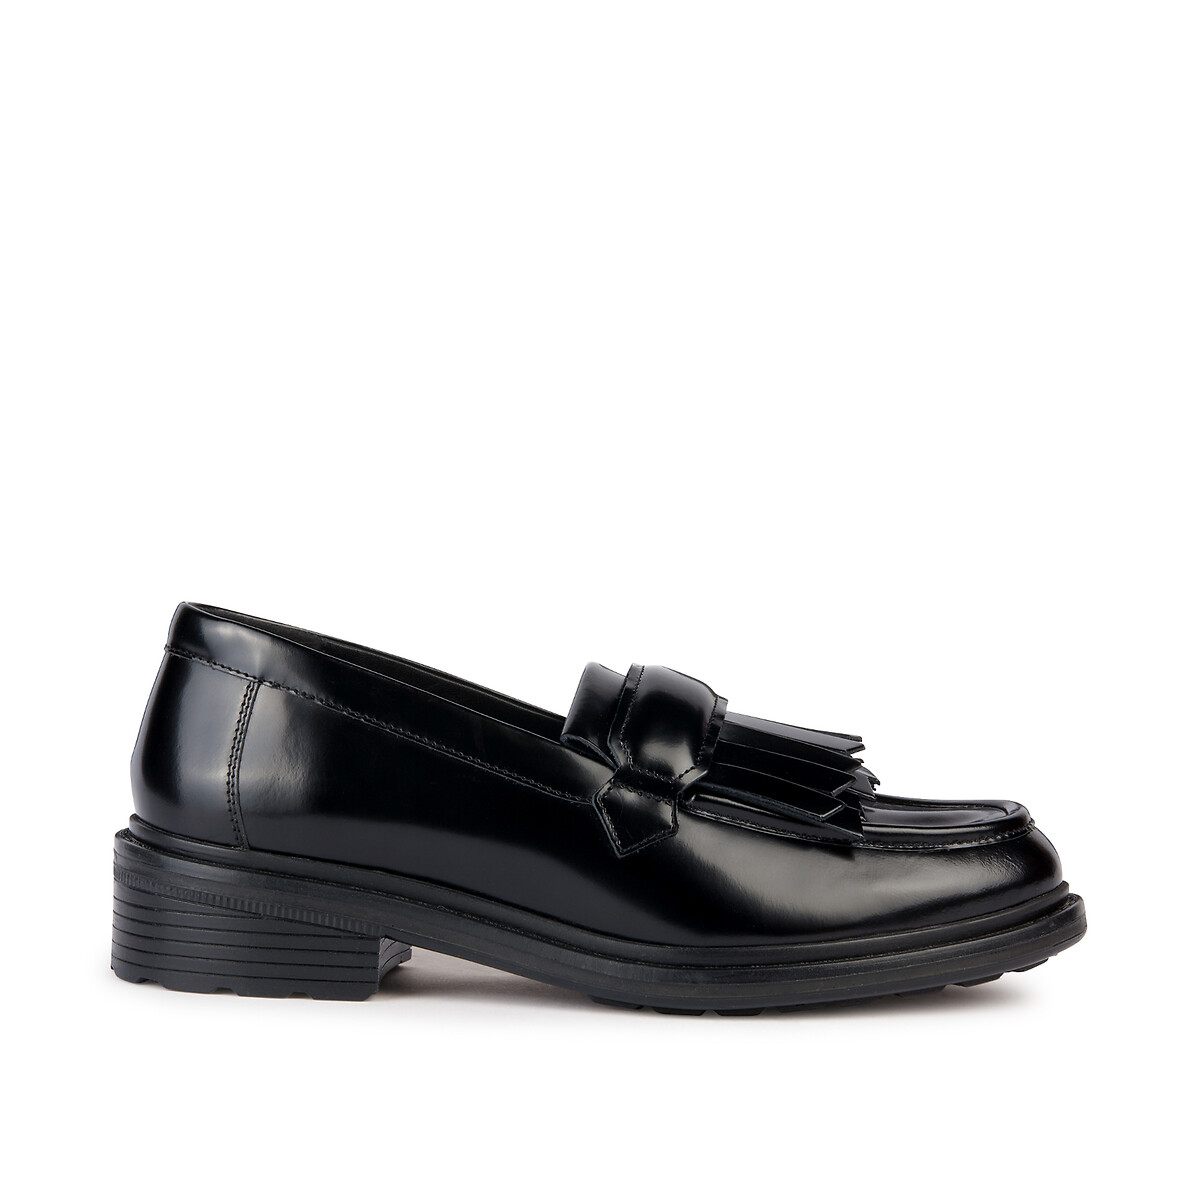 Walk Pleasure Breathable Loafers in Leather